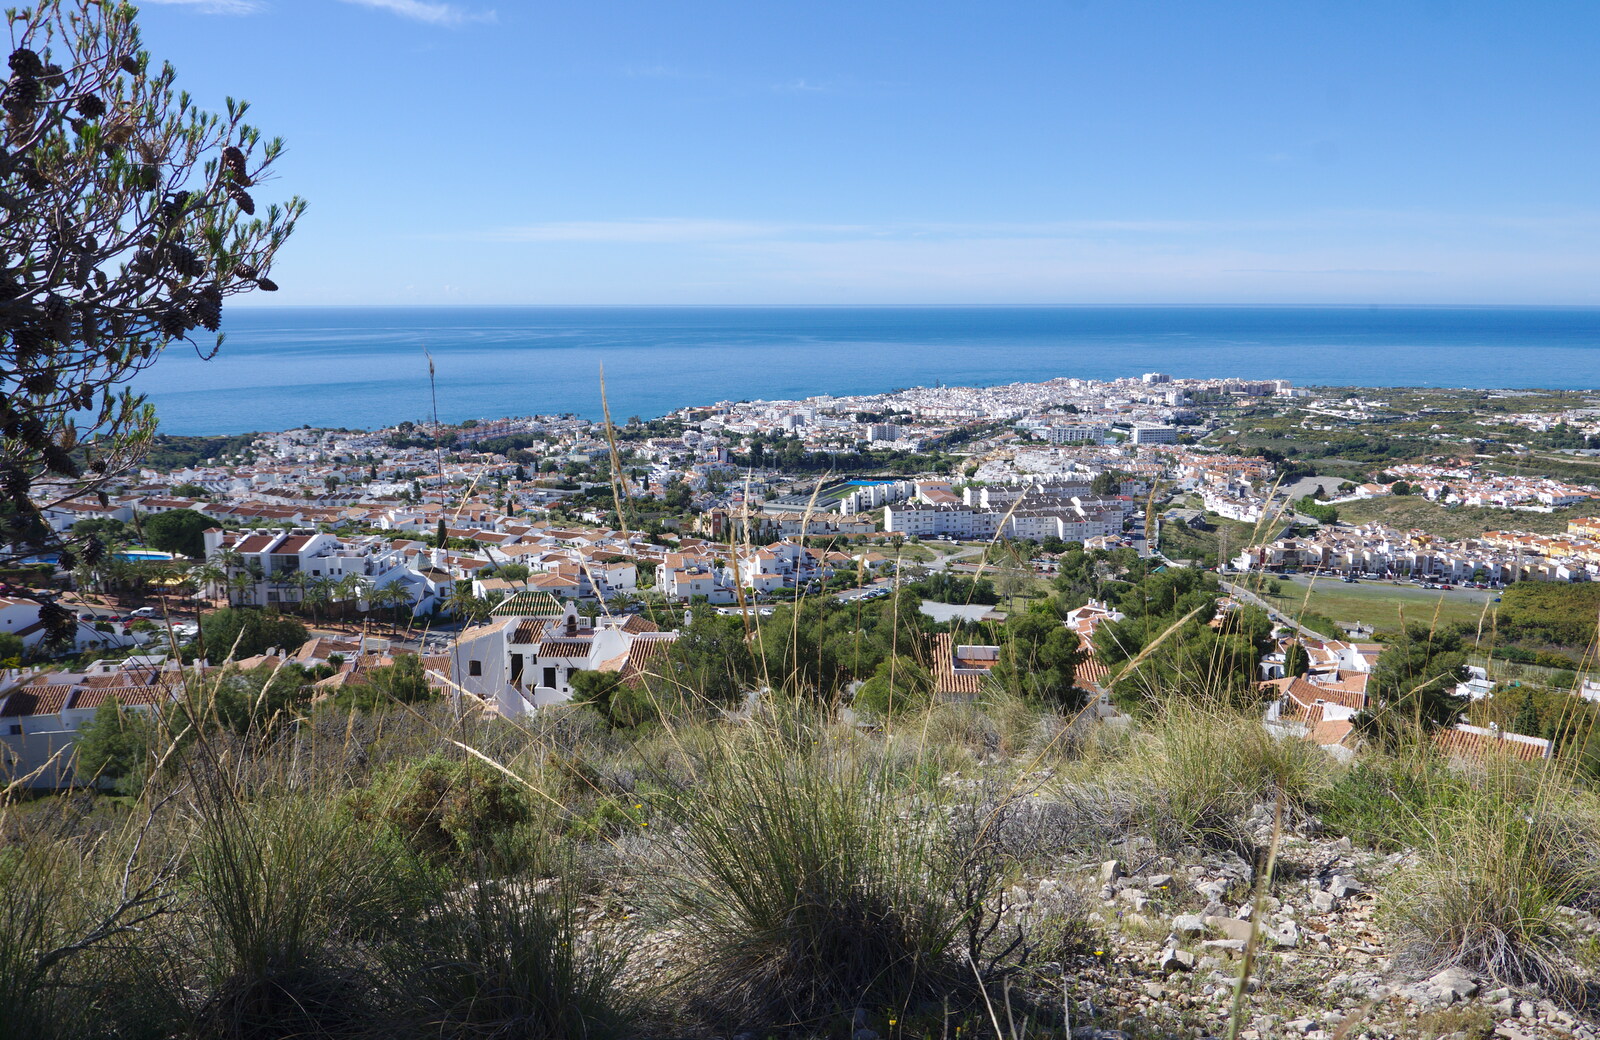 The view over Nerja from A Walk up a Hill, Paella on the Beach and Granada, Andalusia, Spain - 19th April 2018